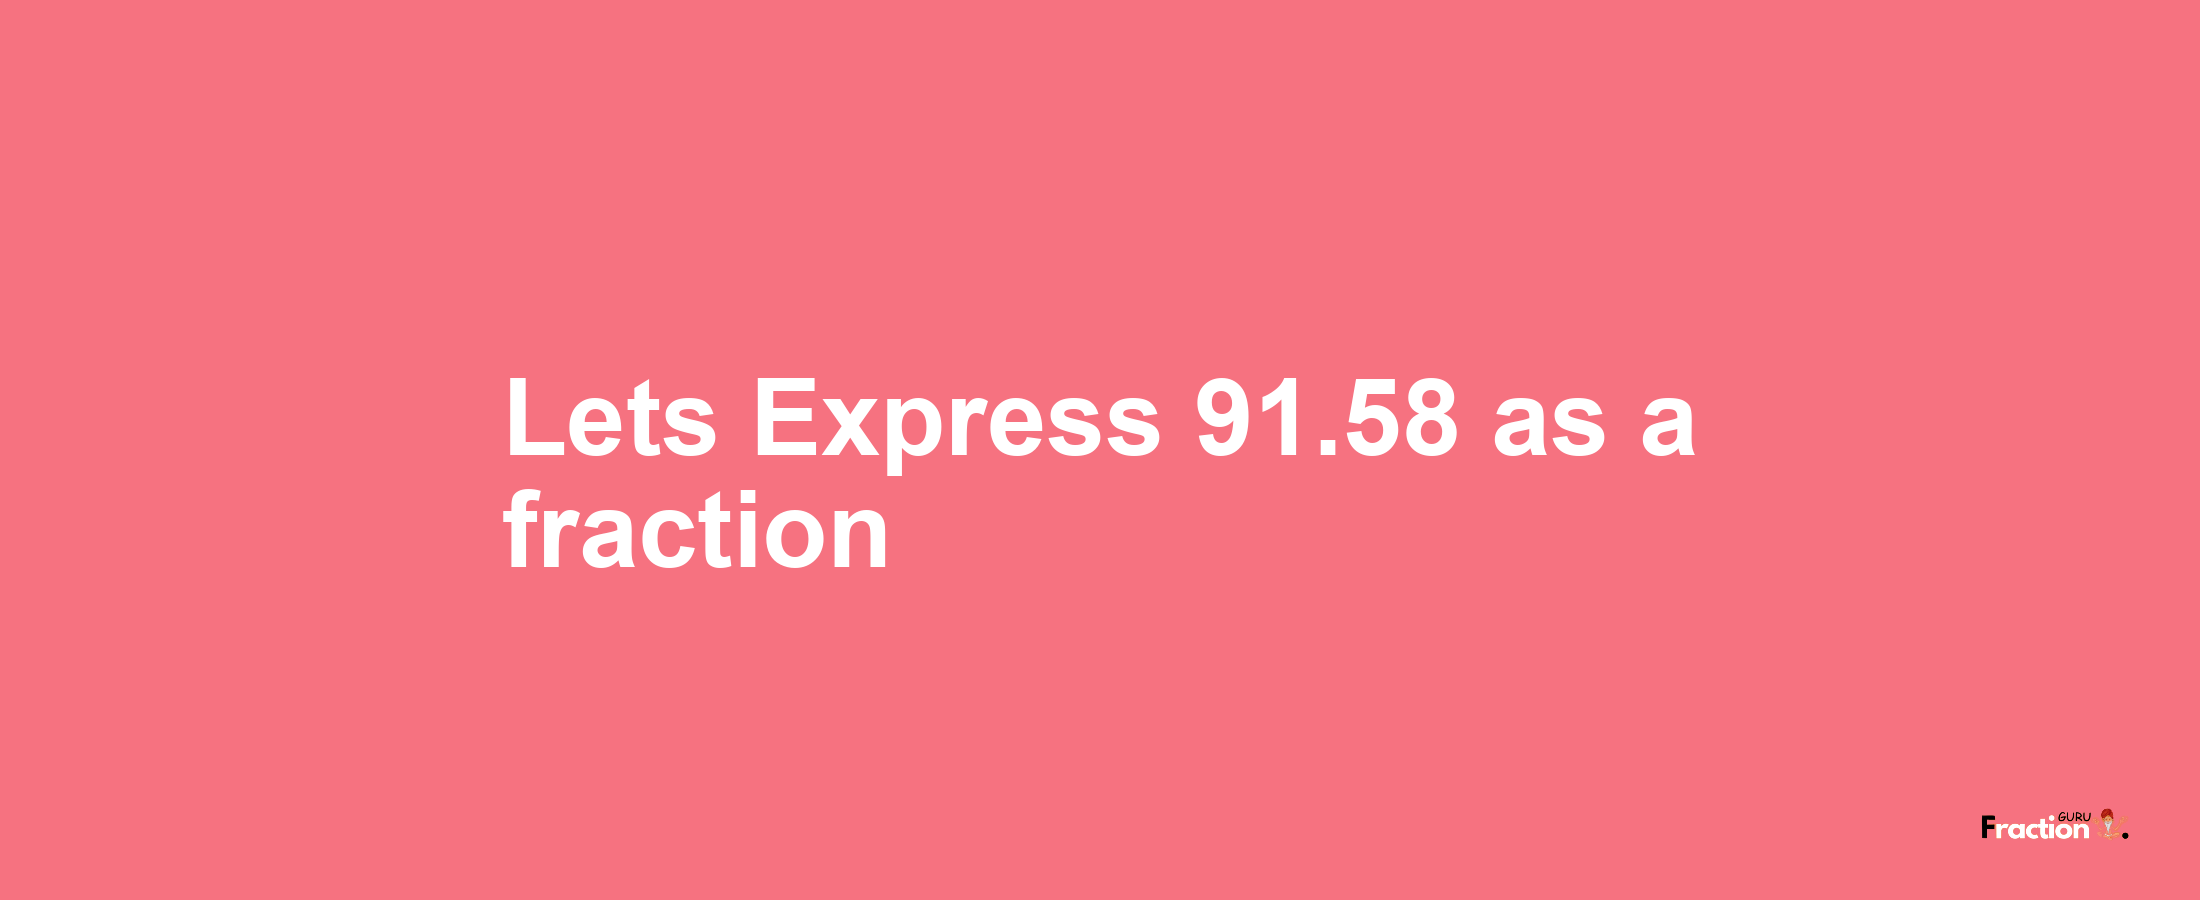 Lets Express 91.58 as afraction